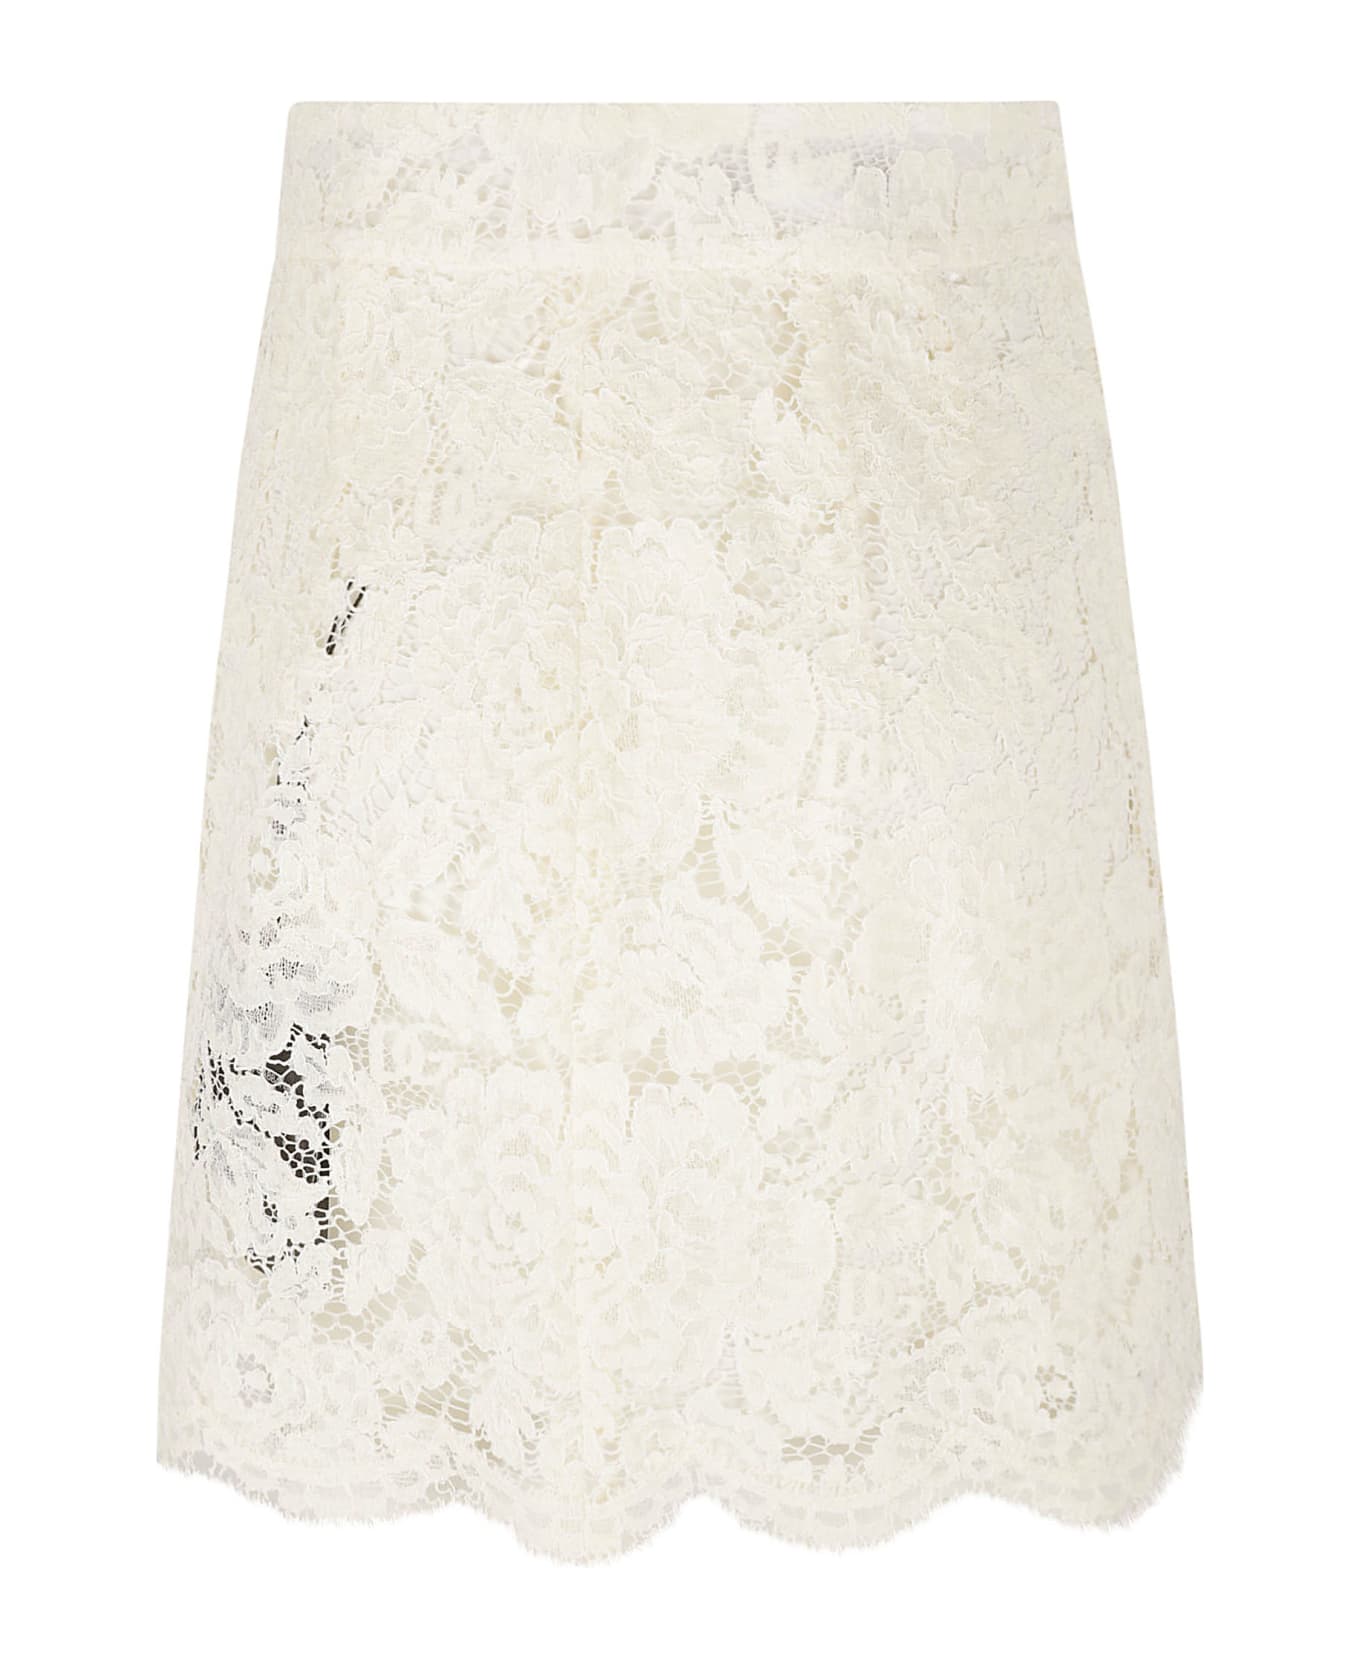 Dolce & Gabbana Floral Embroidered Perforated Skirt - Bianco naturale スカート